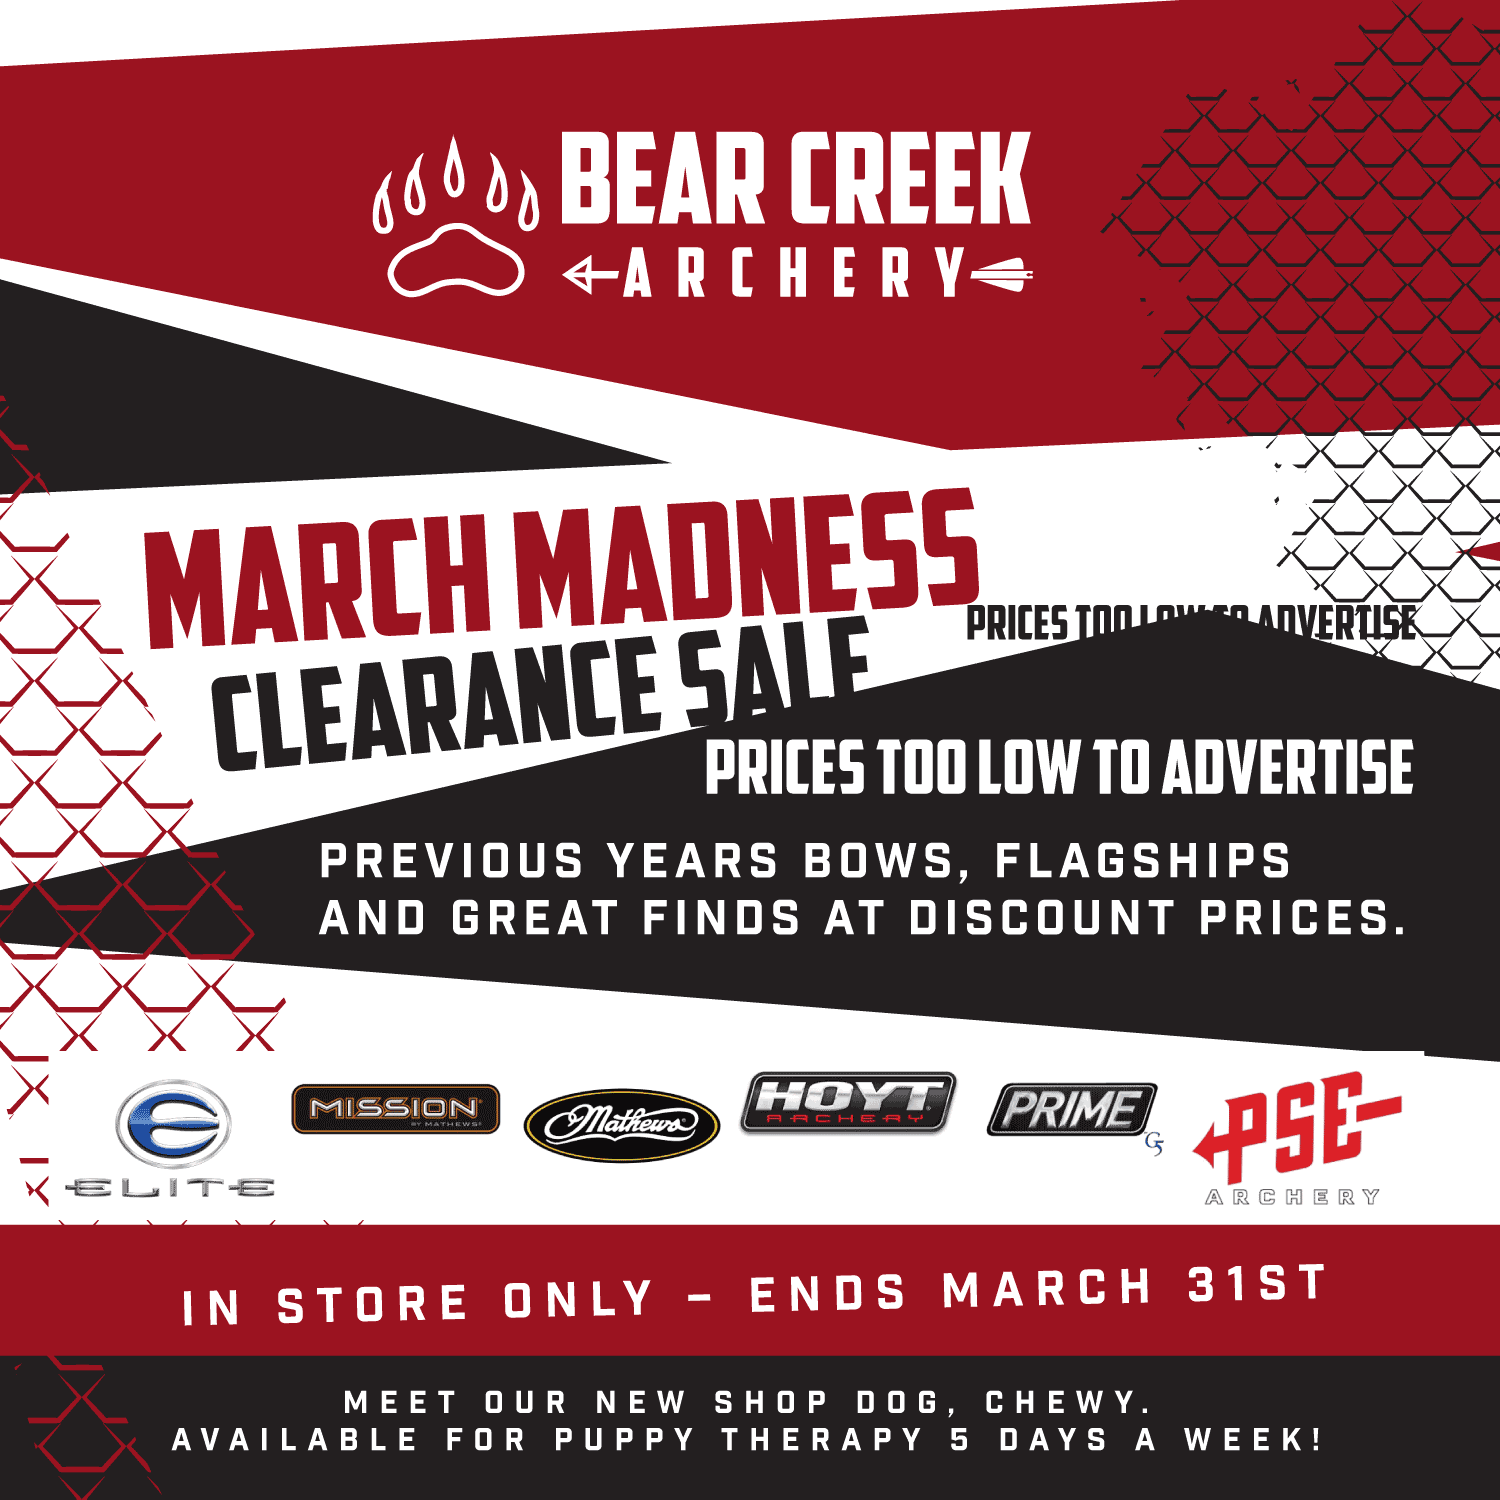 https://www.bearcreekarchery.com/wp-content/uploads/2022/03/BCA-MarchMadness-RGB-v01-1500px.png